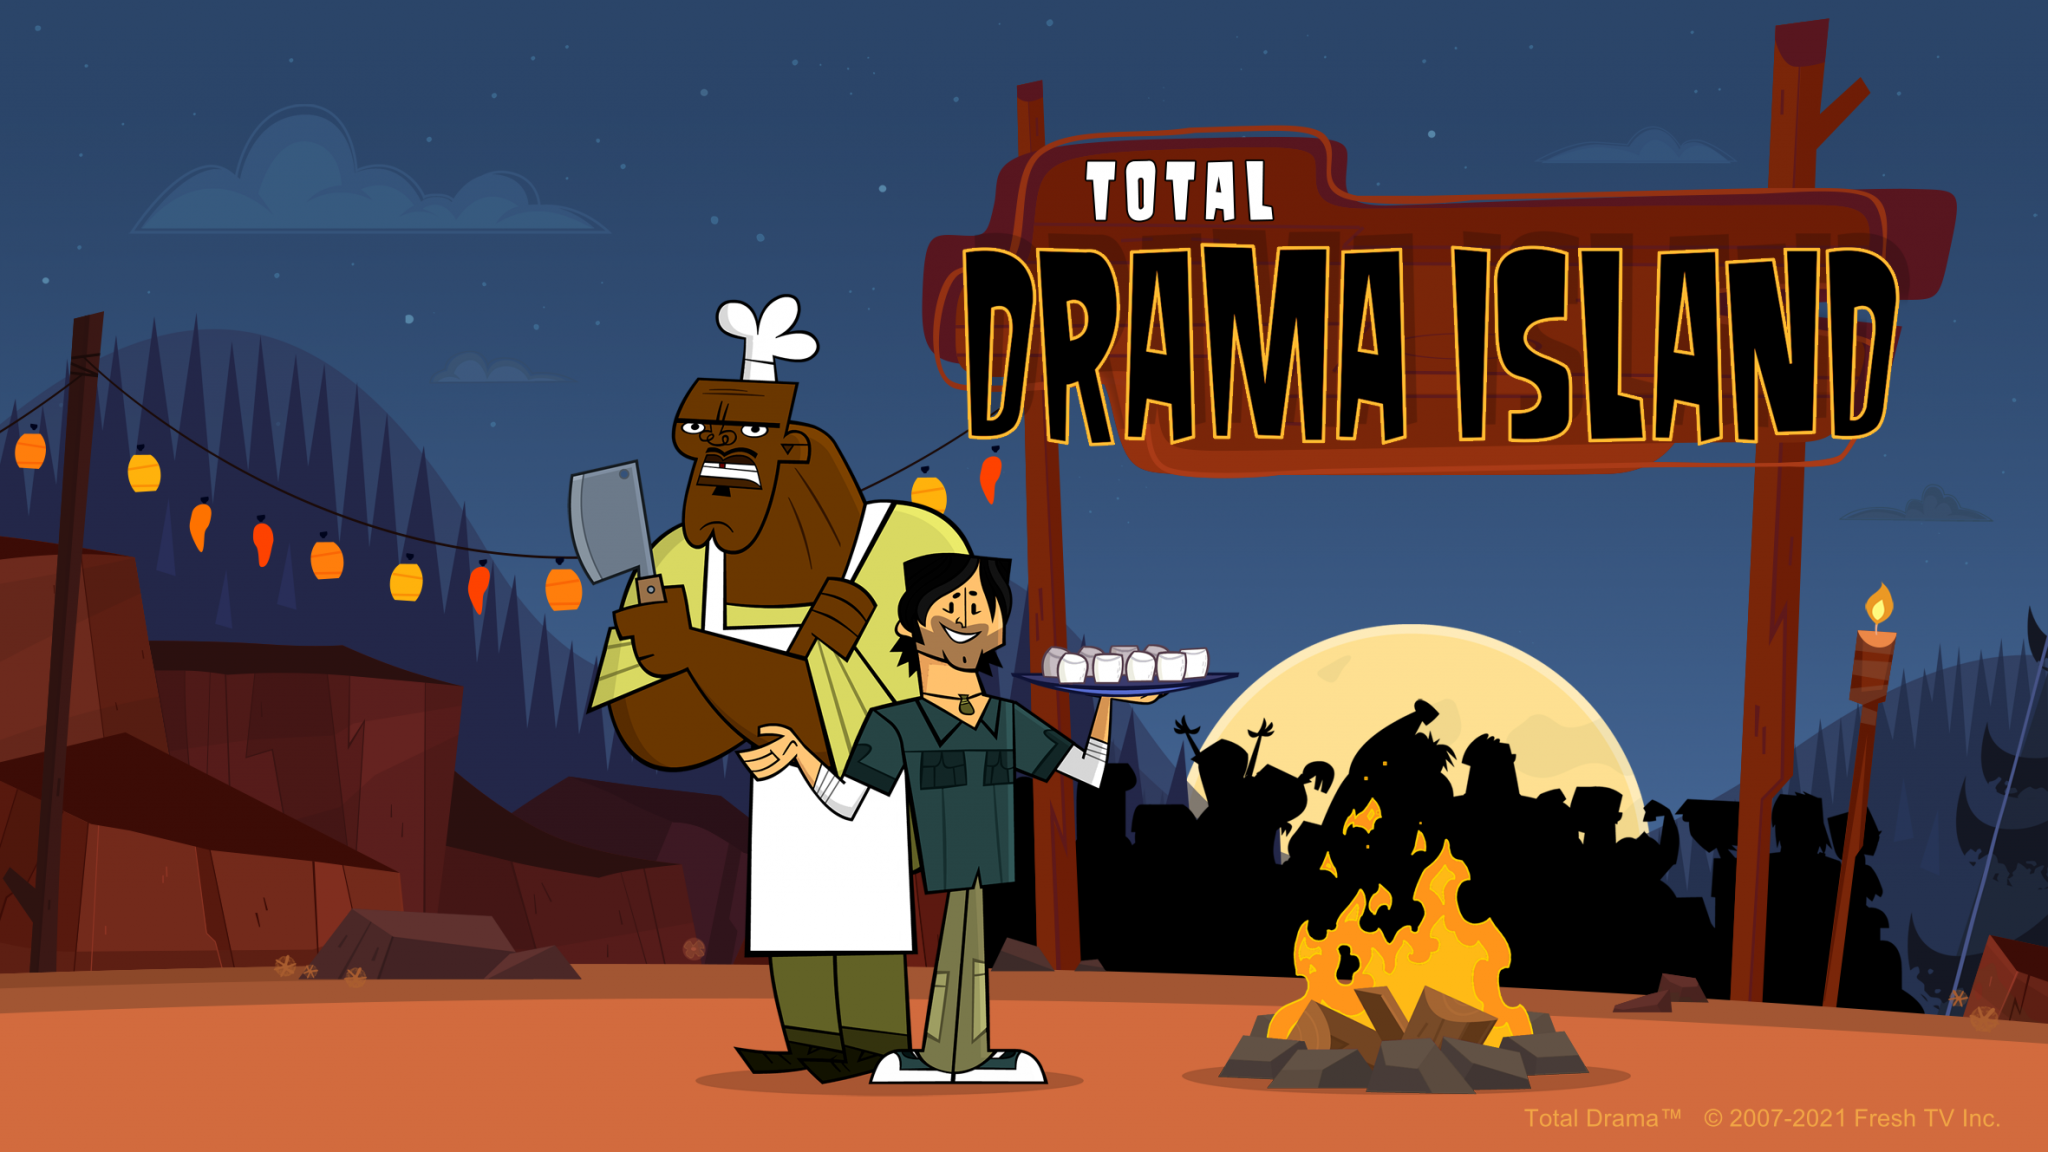 Hit Animated Reality Series Total Drama finds new UK home on CBBC